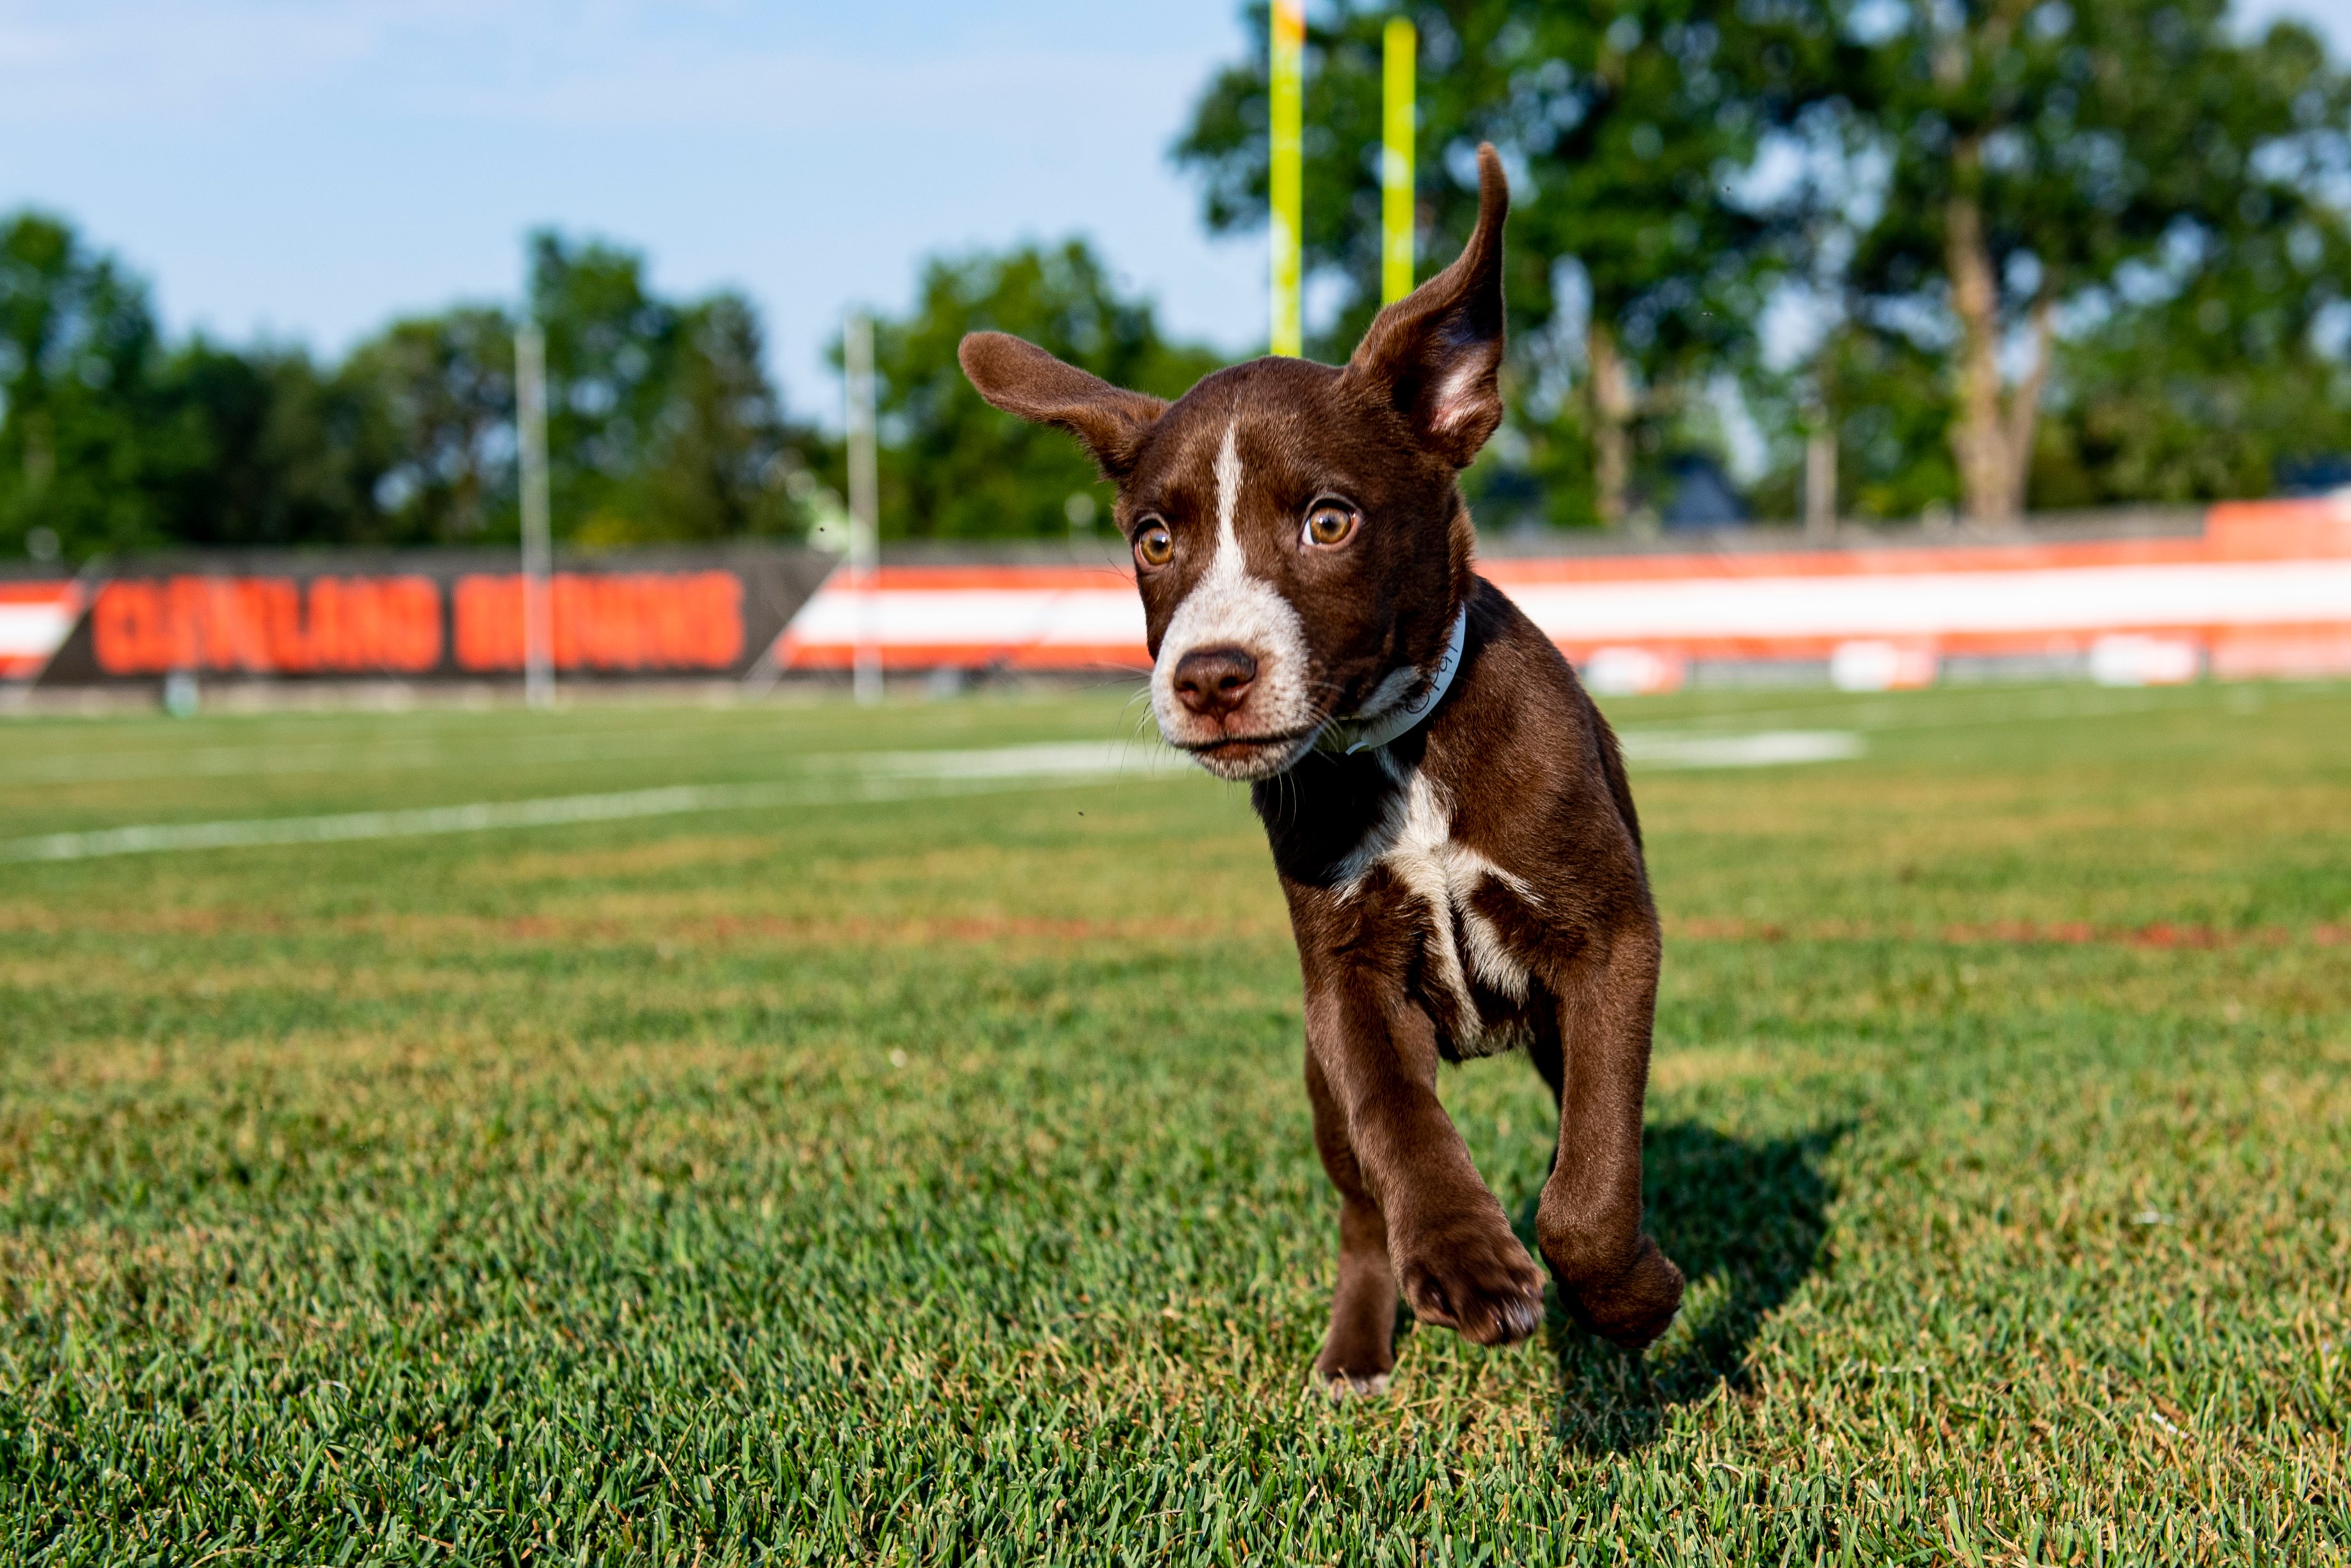 In the dog days of summer, the Cleveland Browns' puppy adoption